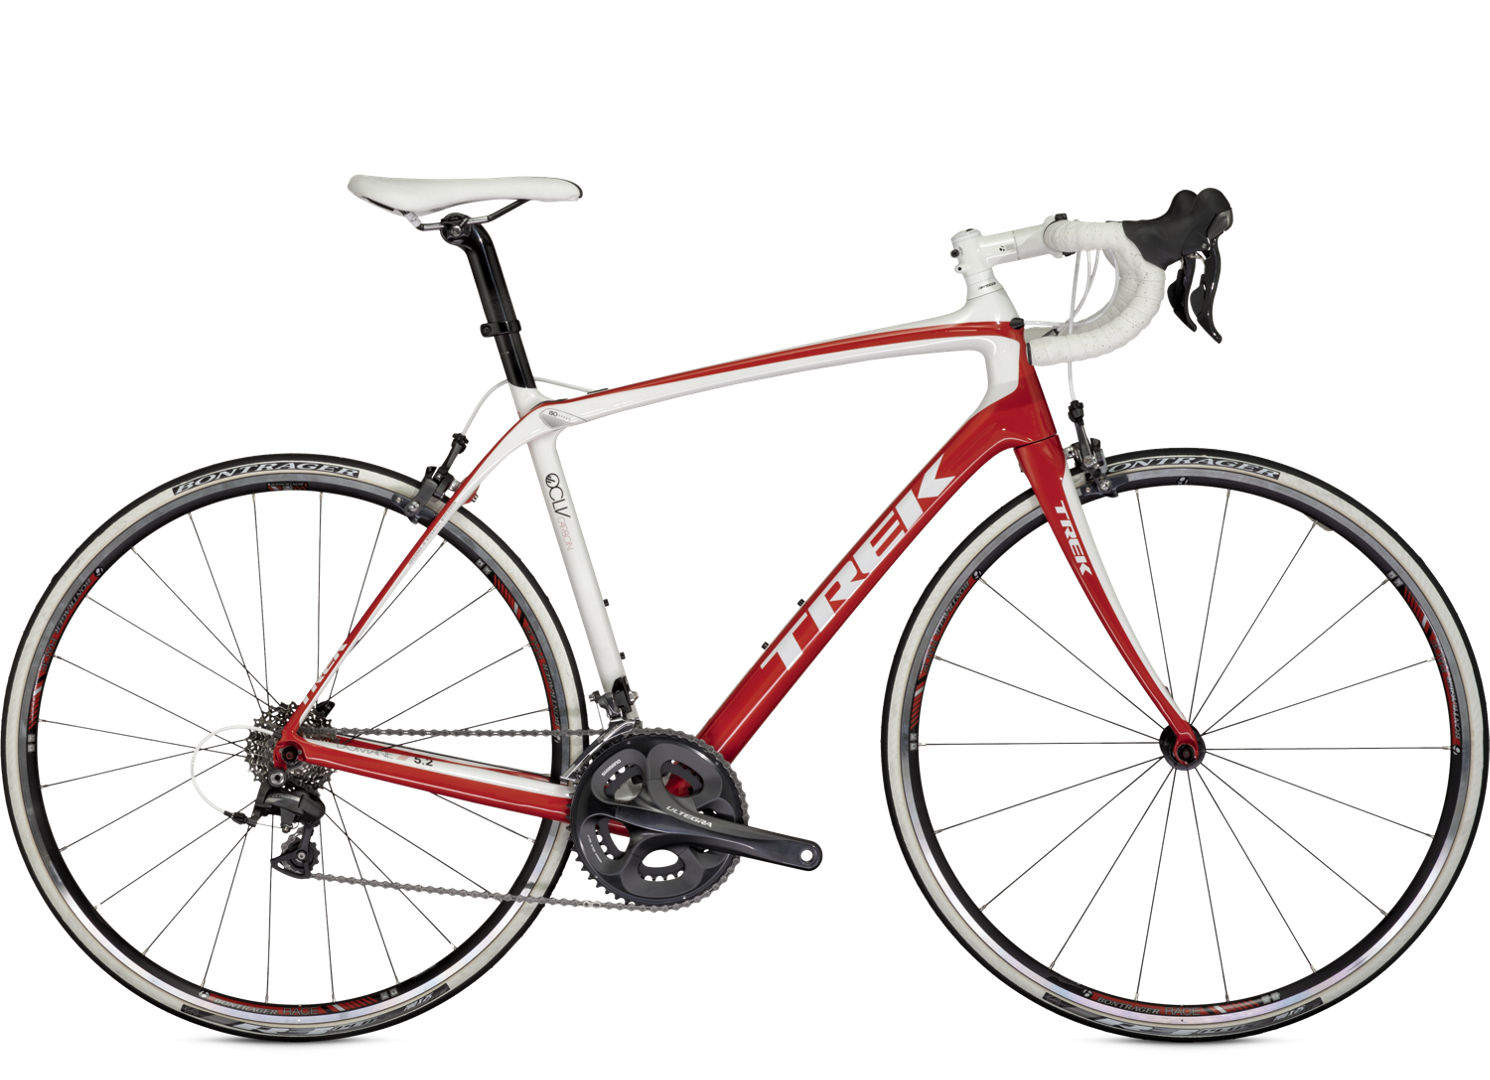 2013 Domane 5 Series First Look